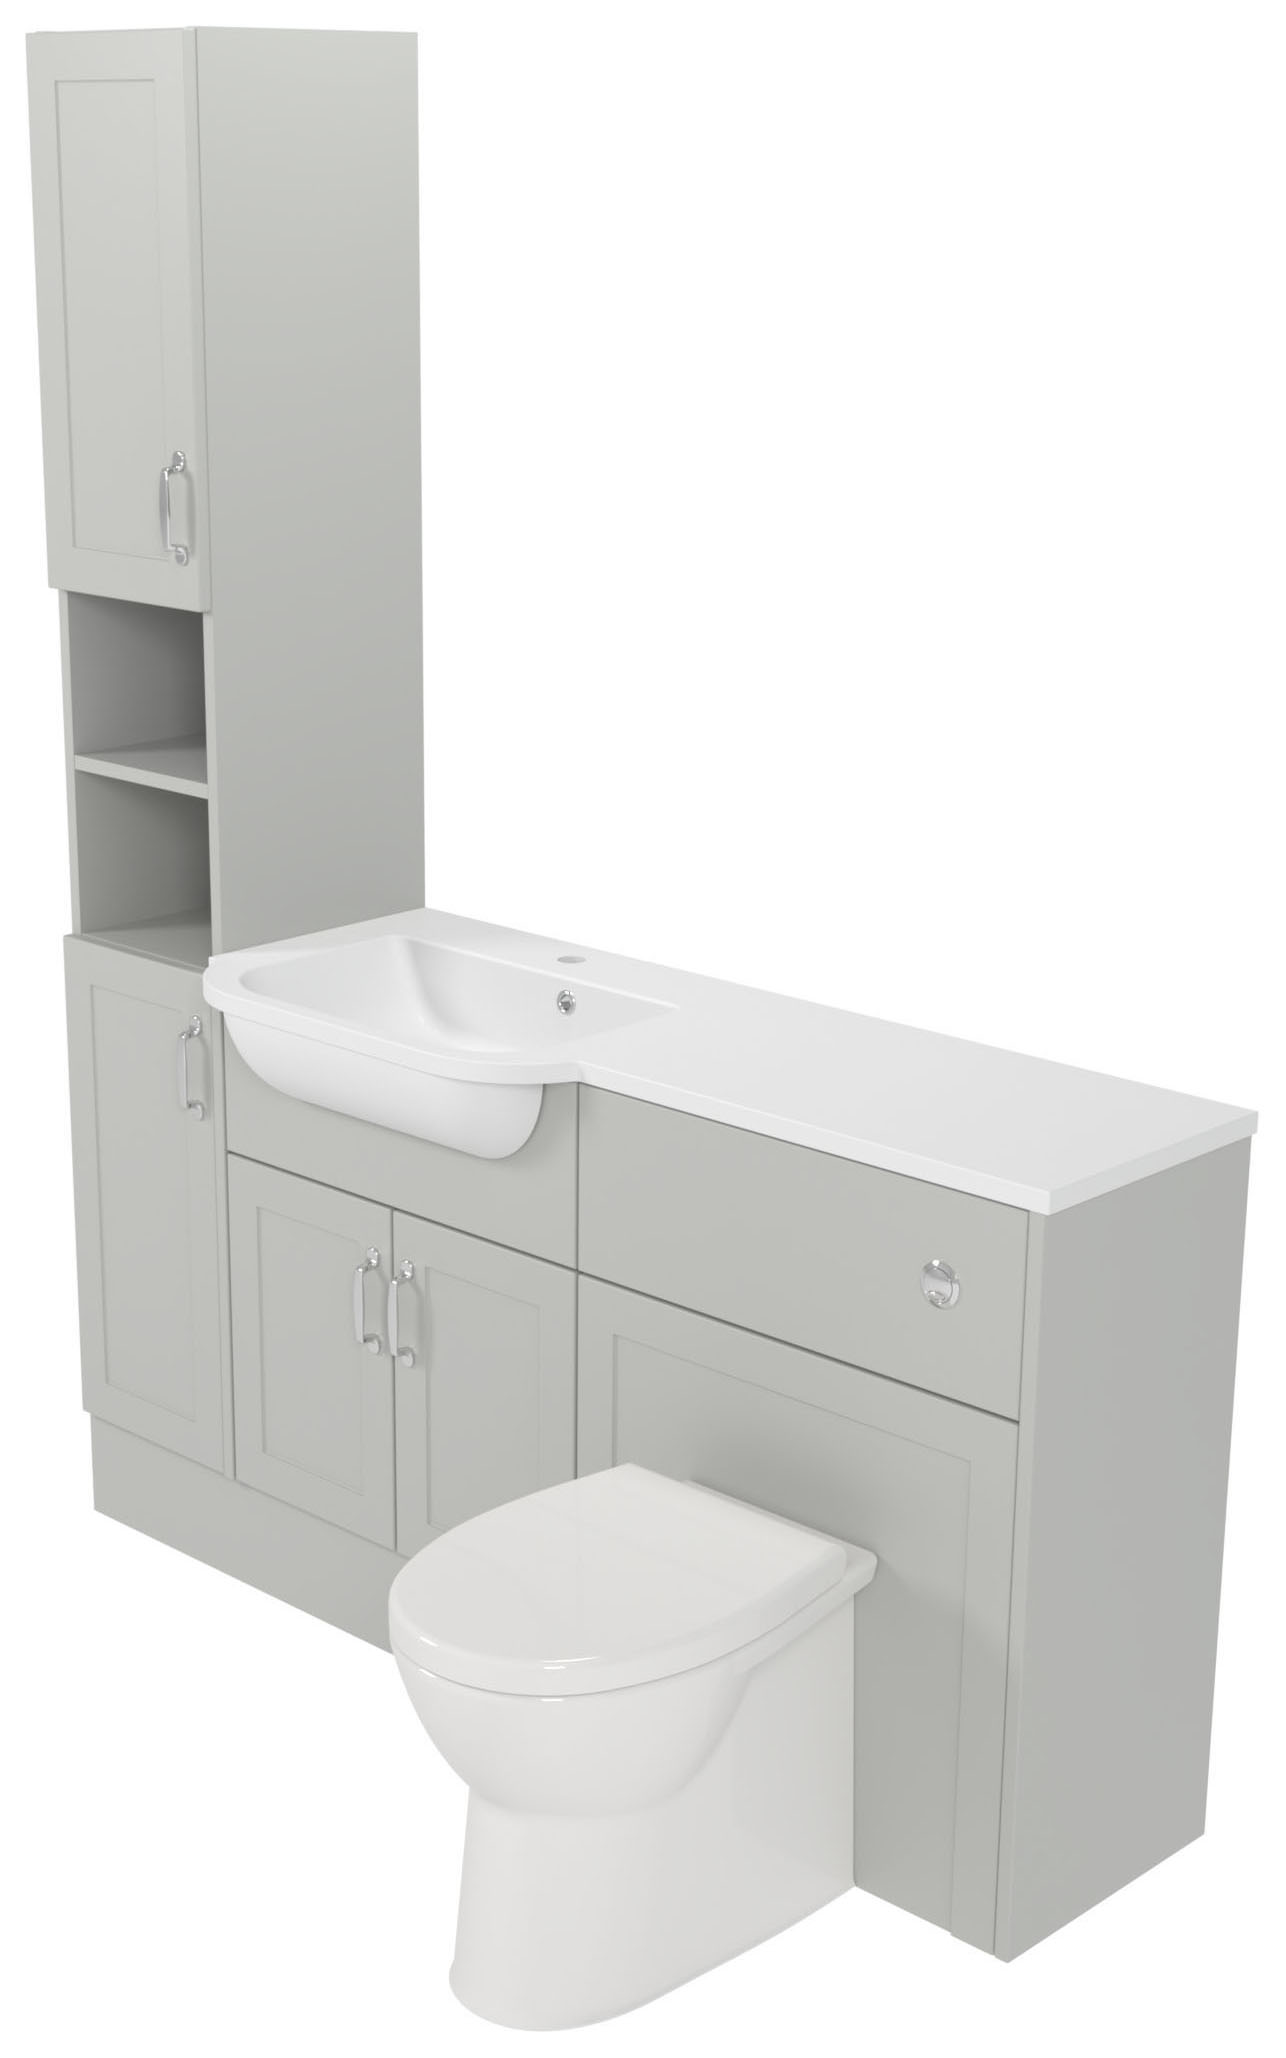 Deccado Padworth Whisper Grey 1500mm Fitted Tower, Vanity & Toilet Pan Unit Combination with Basin